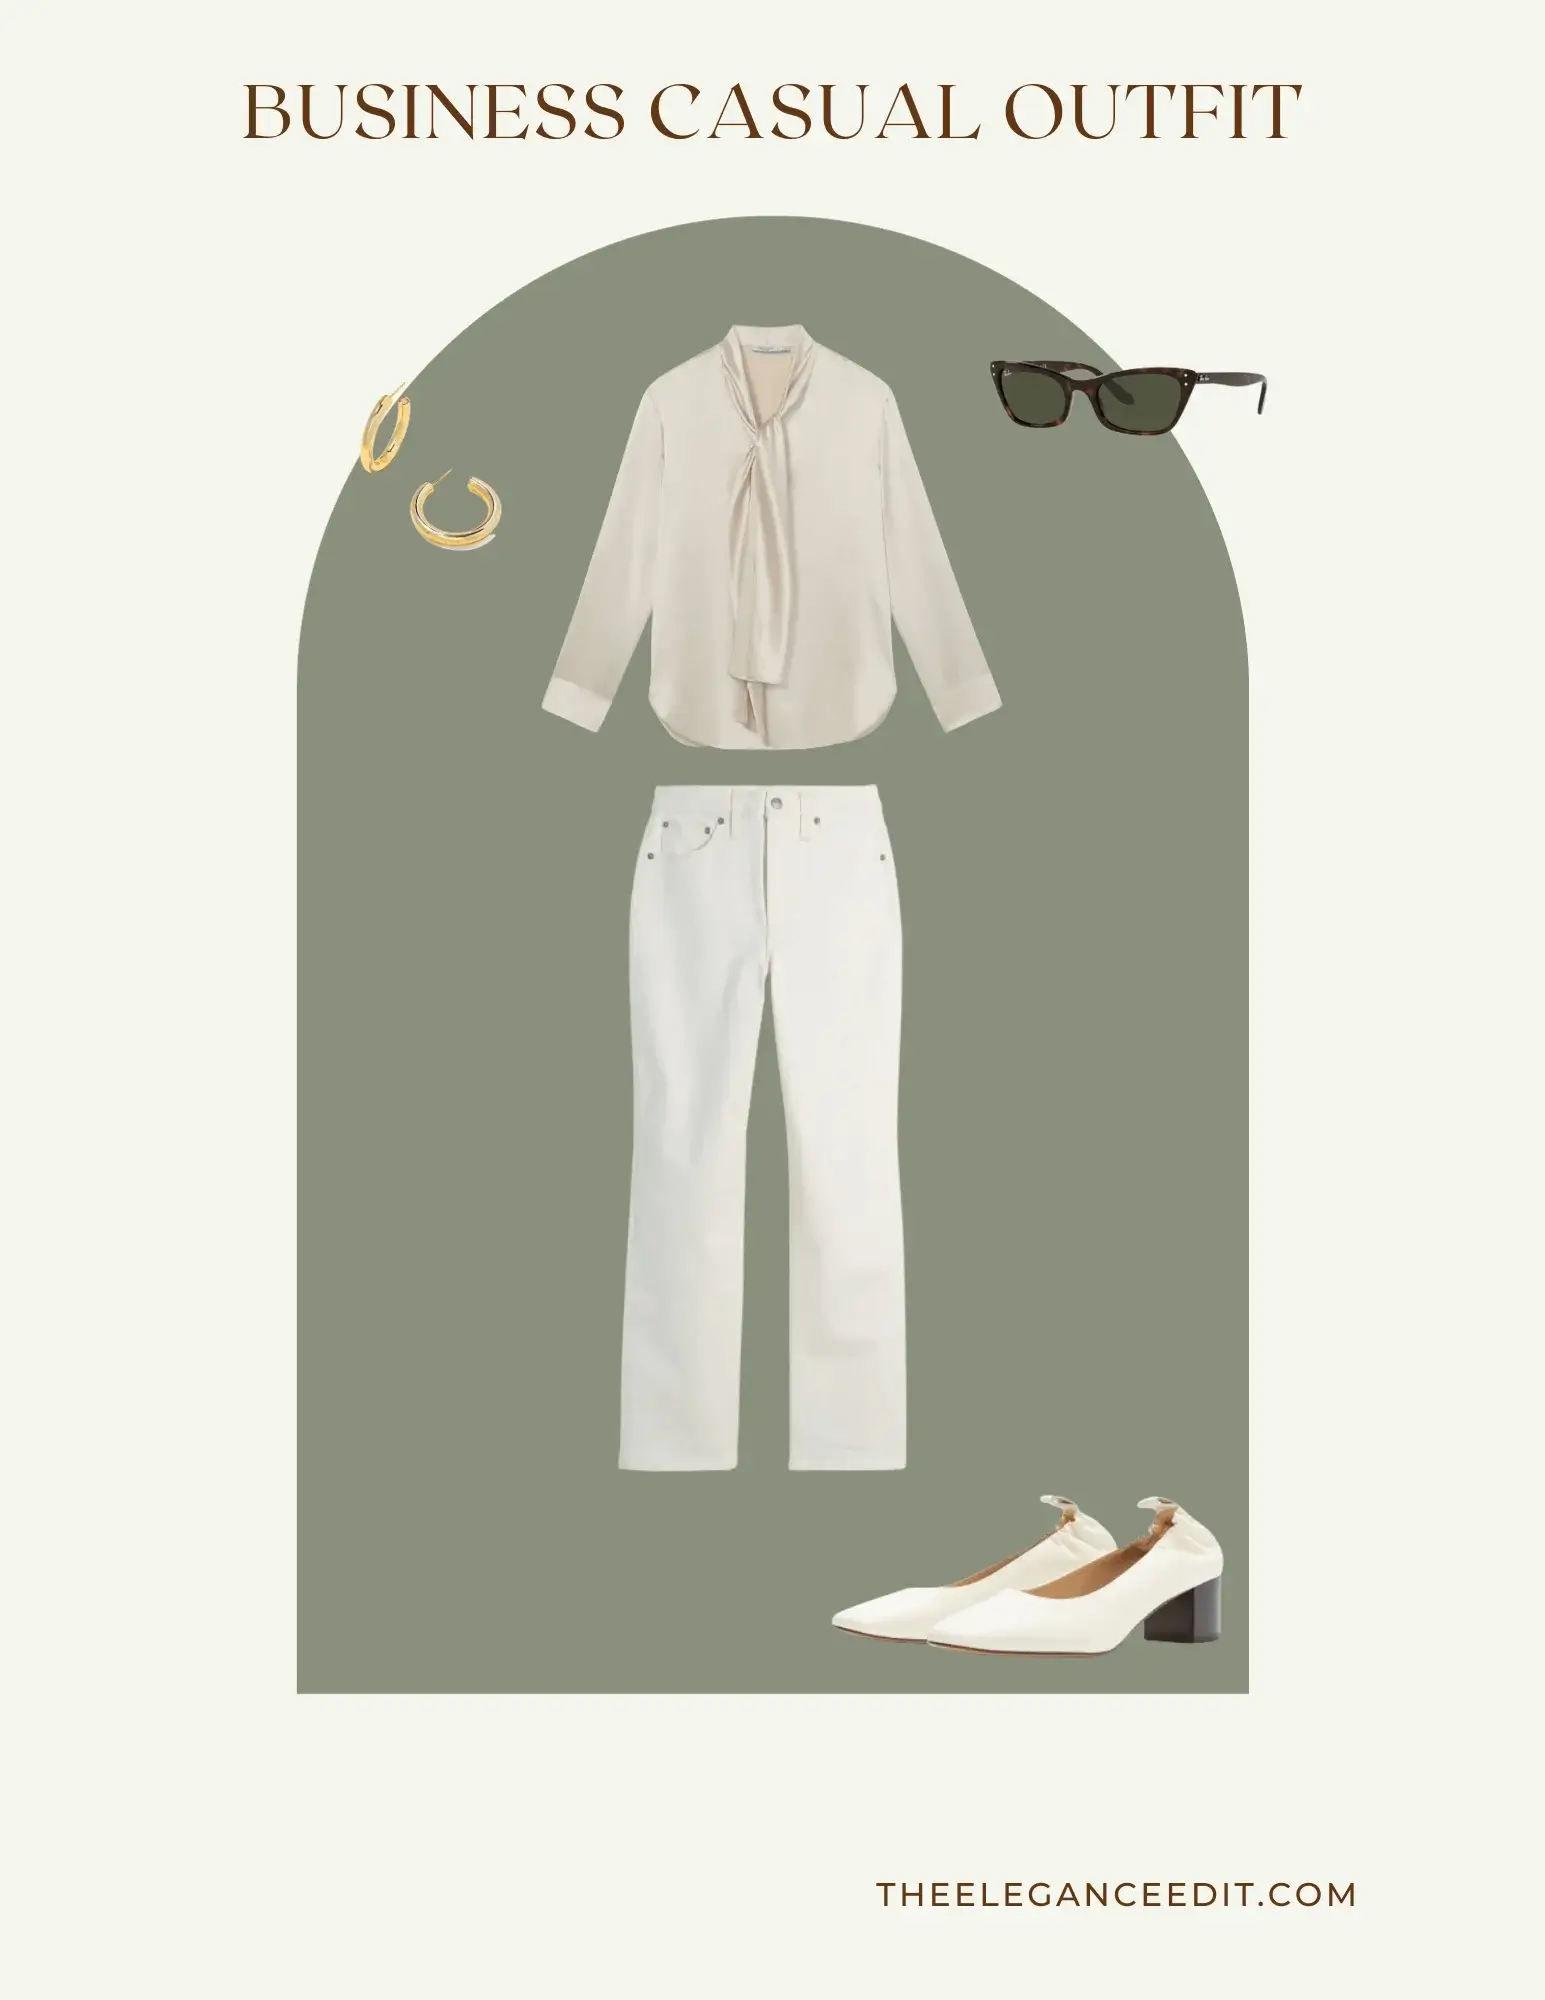 Silk blouse with white jeans and block heels business casual capsule wardrobe outfit